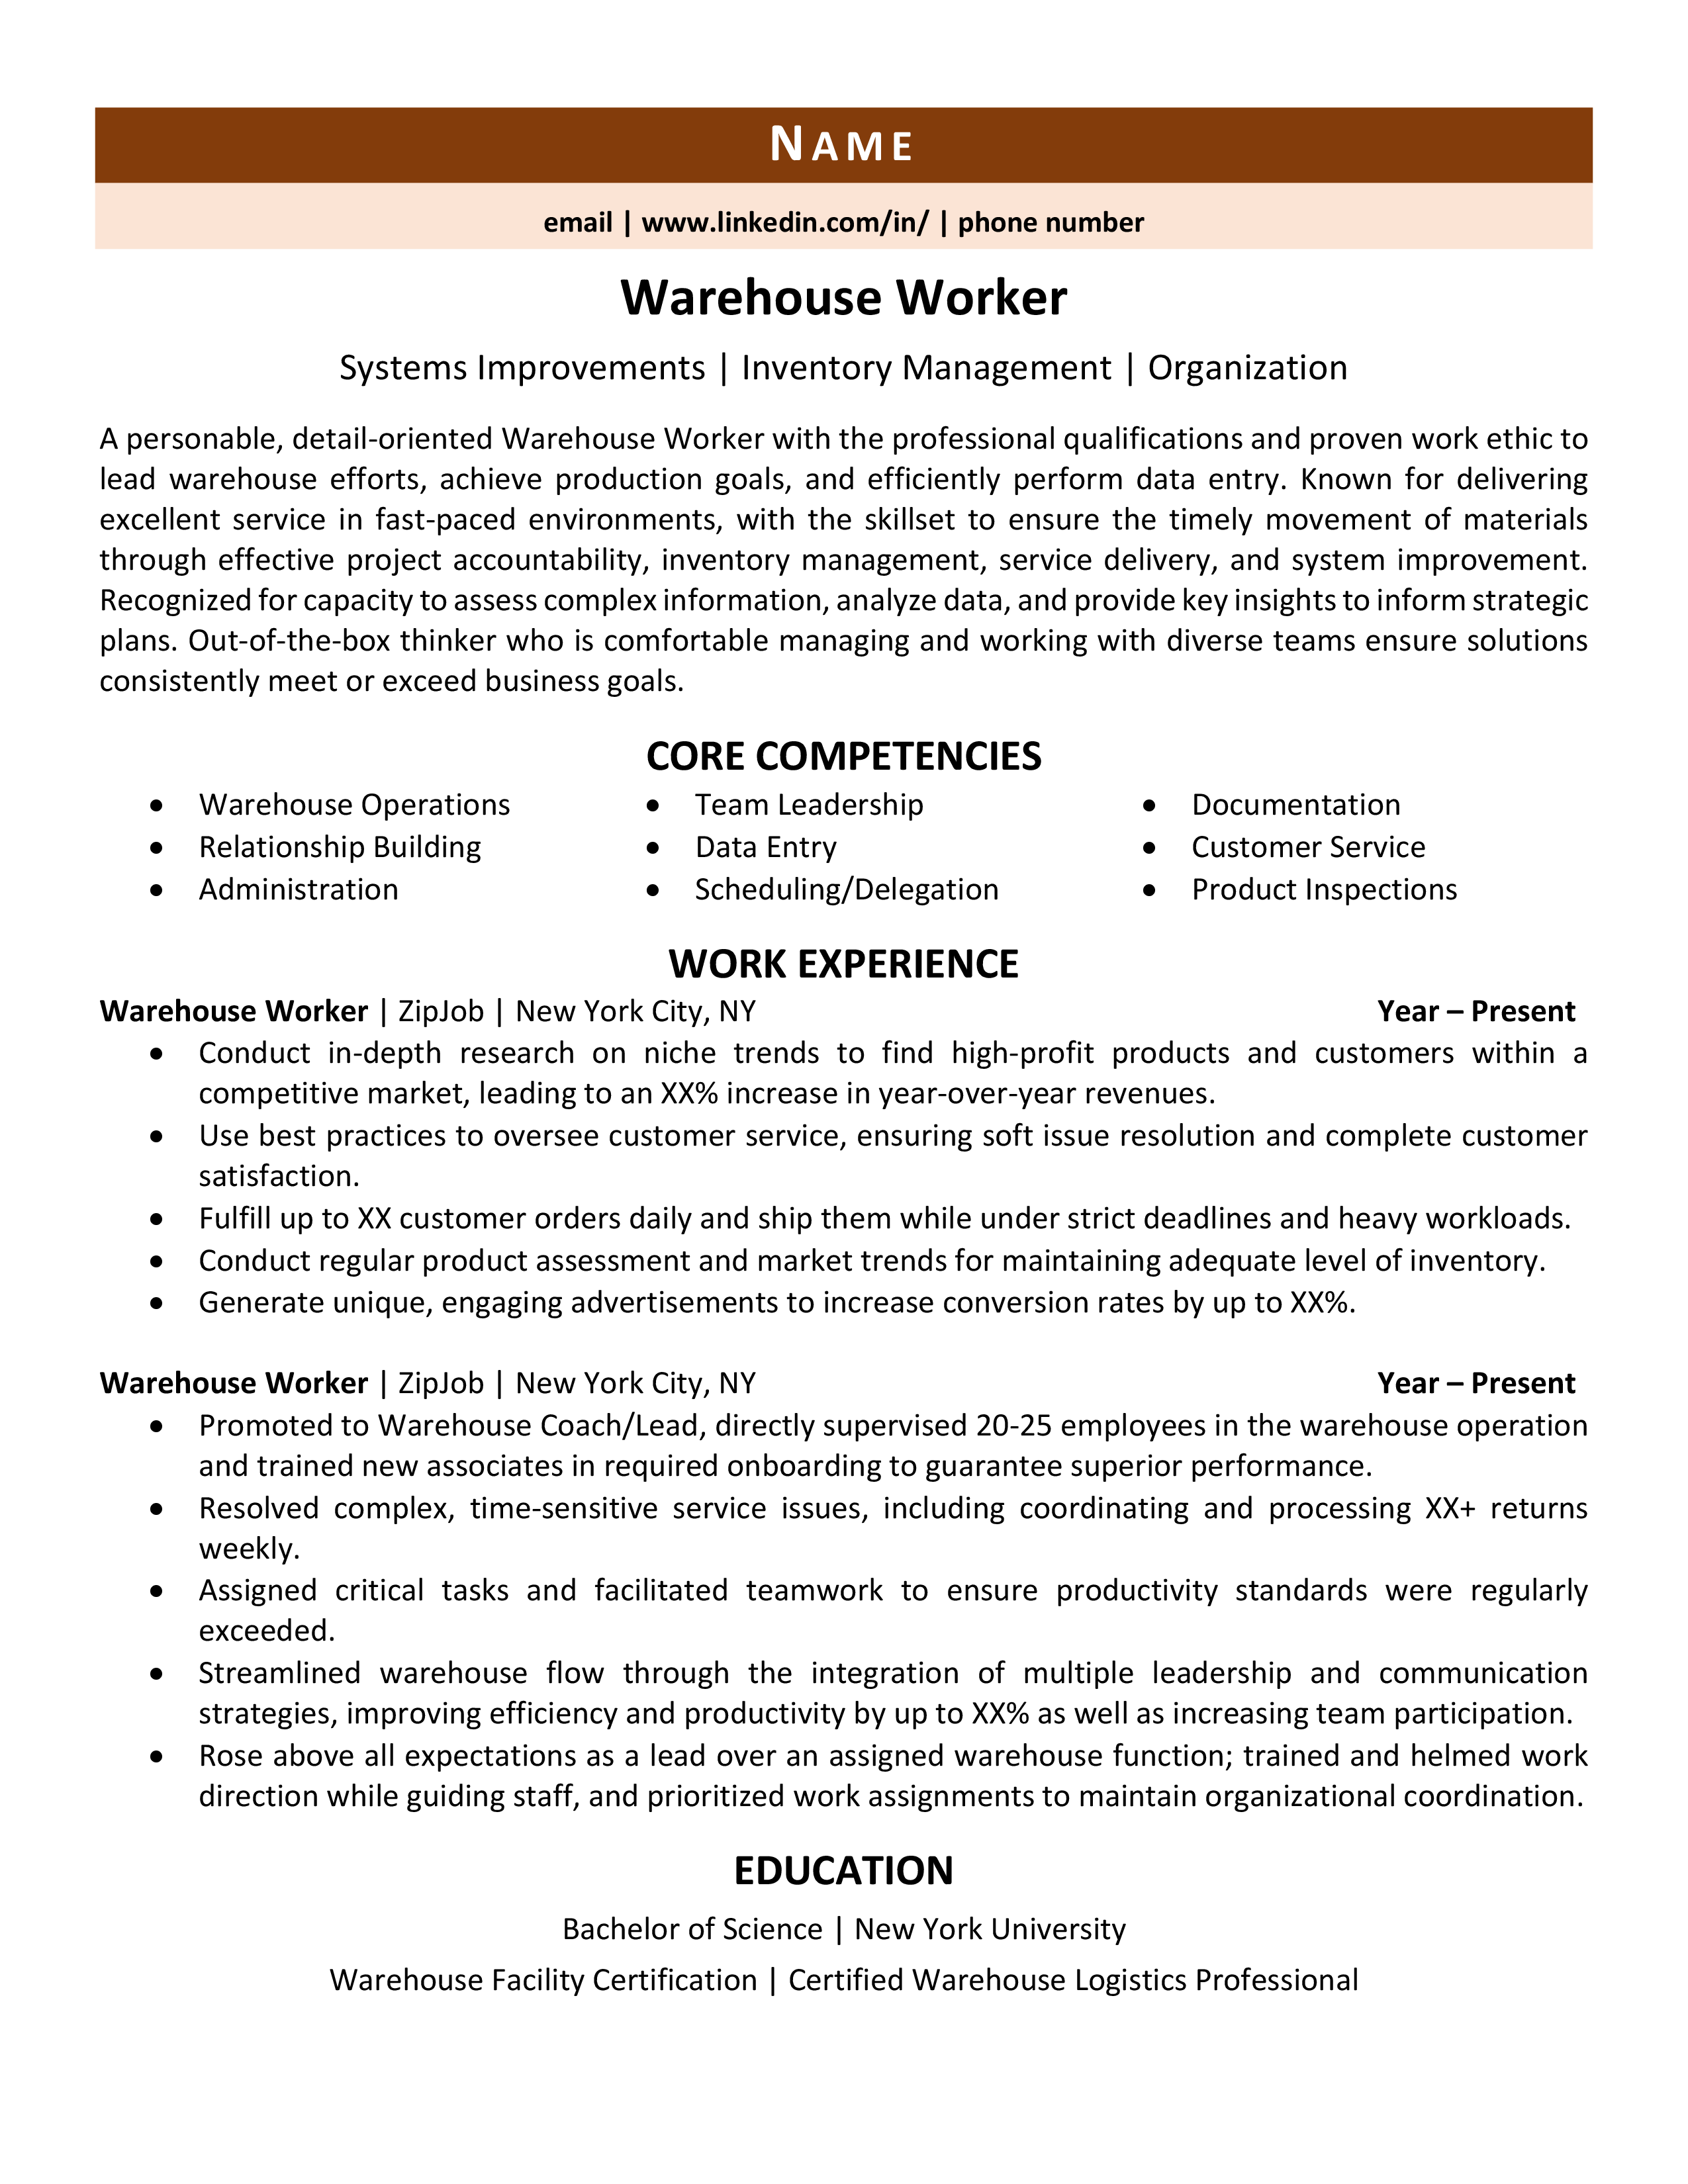 how to write a resume objective for warehouse